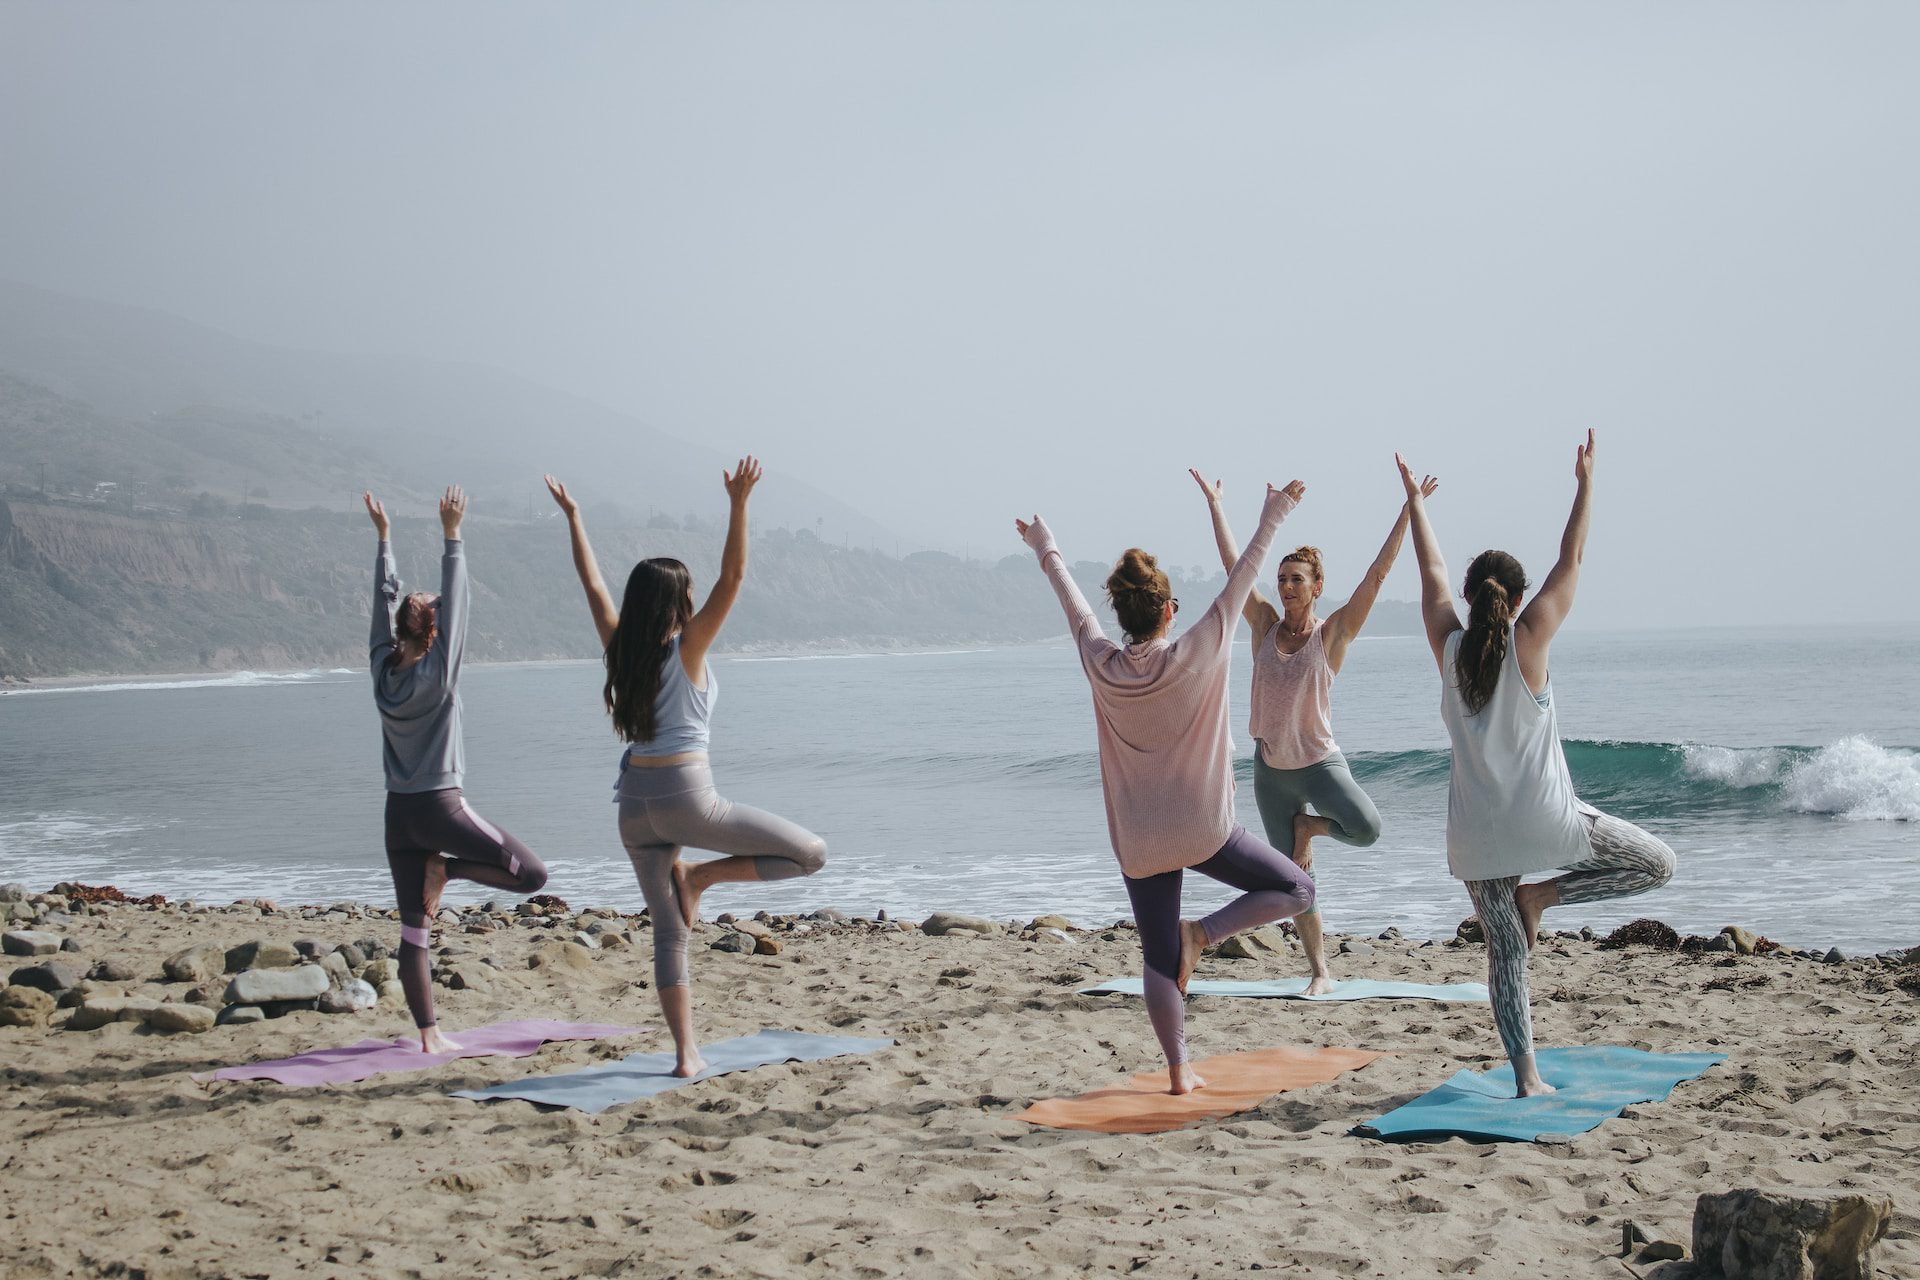 A group of women doing yoga on the beach on a cloudy day.